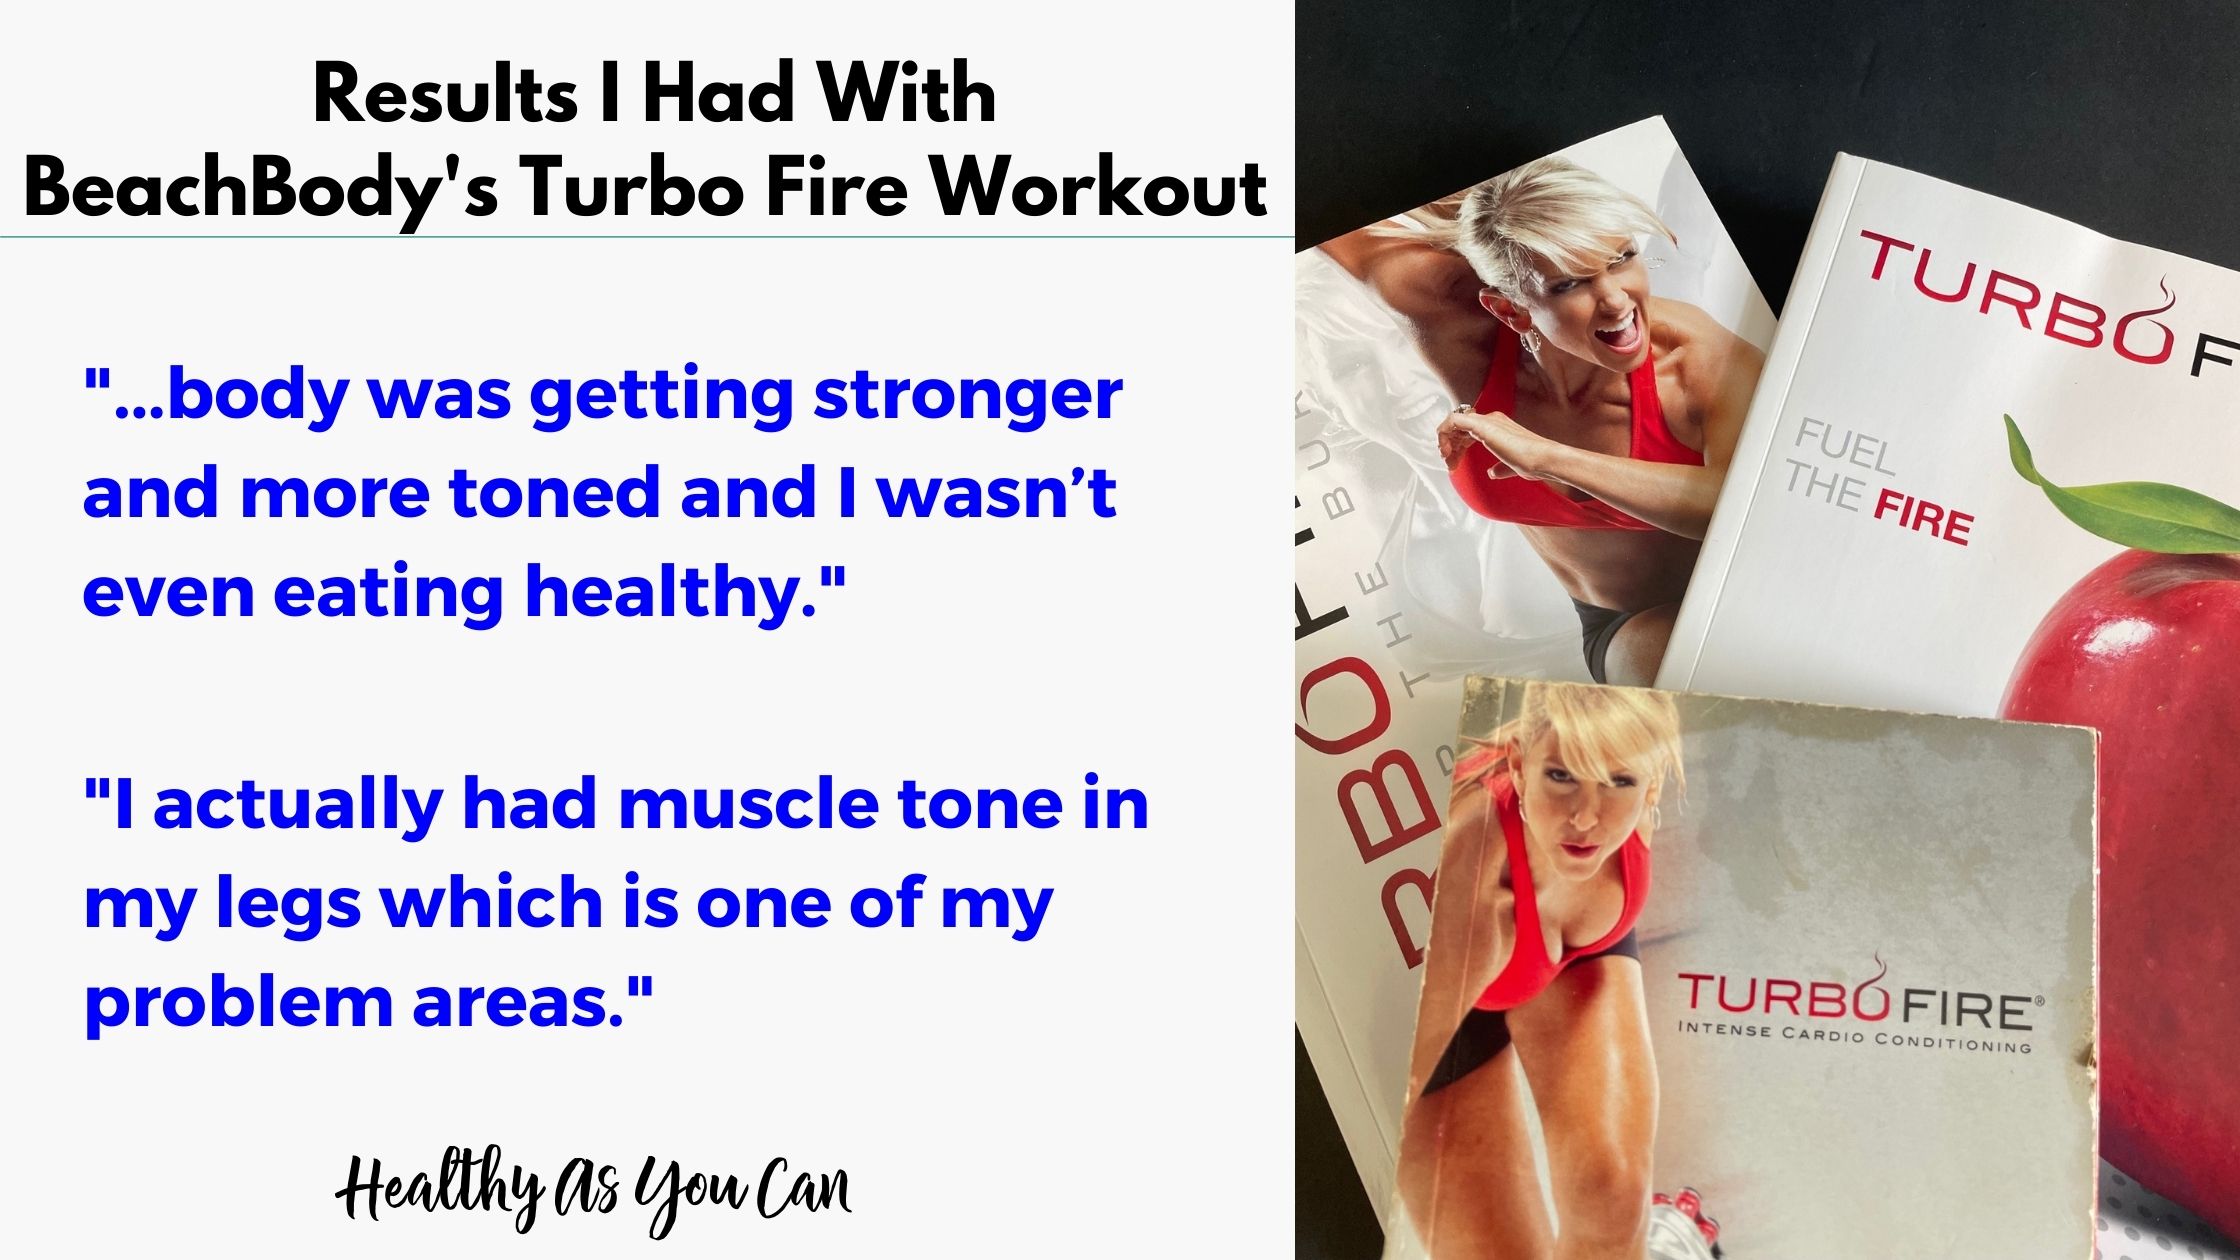 turbo fire workout transformation results 